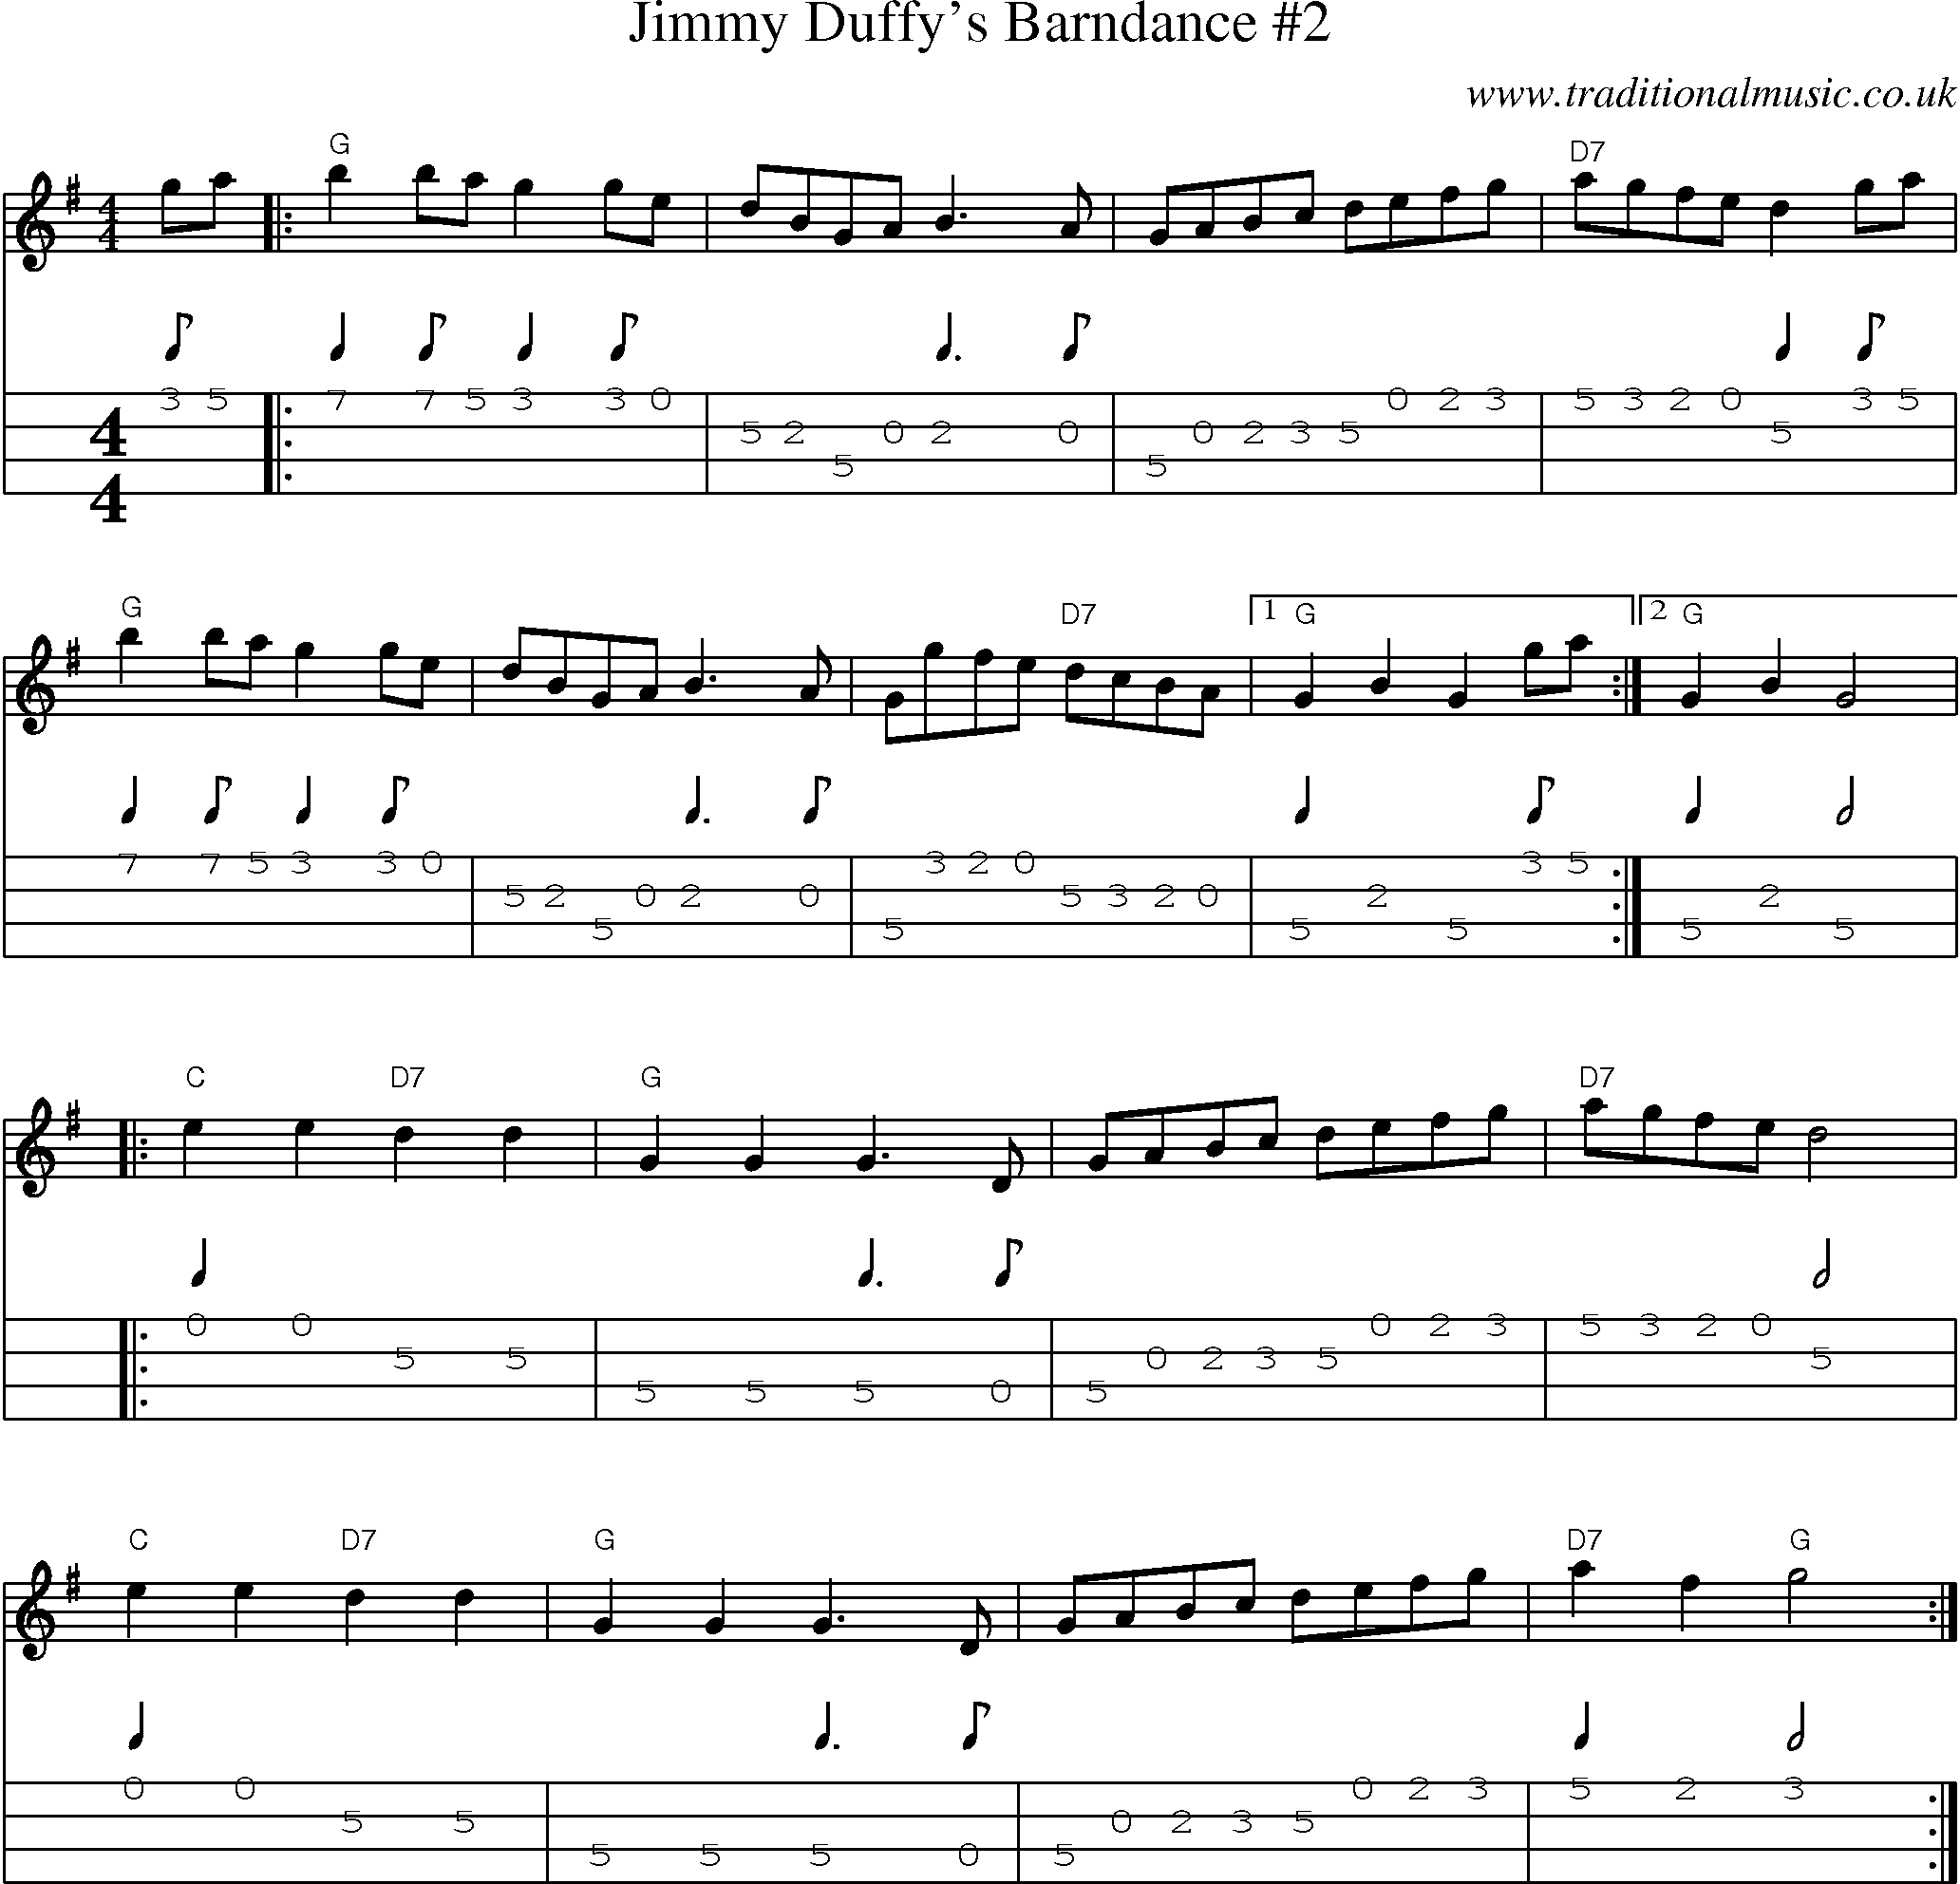 Music Score and Mandolin Tabs for Jimmy Duffys Barndance 2